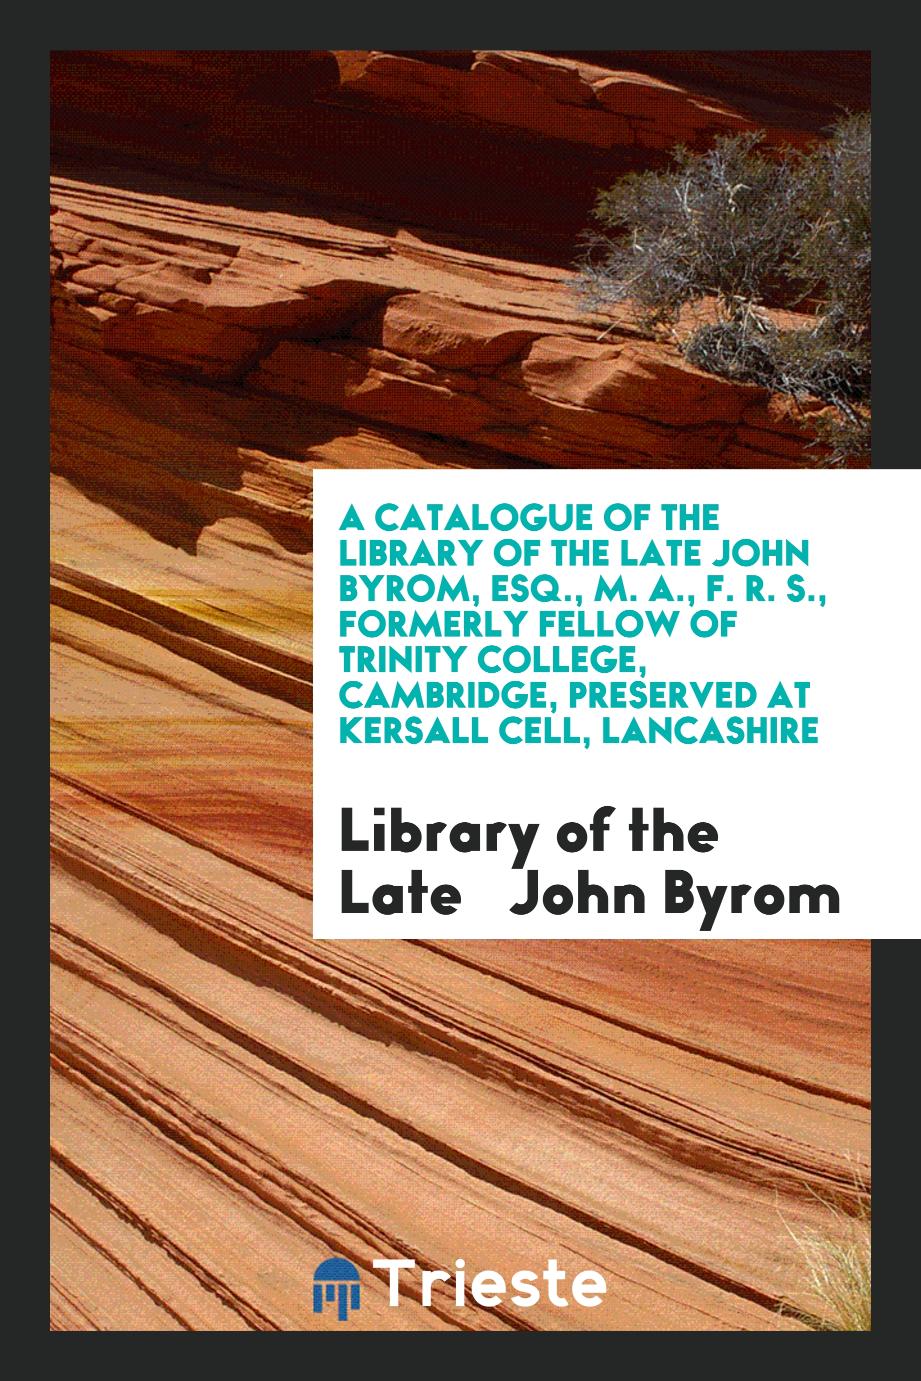 A Catalogue of the Library of the Late John Byrom, Esq., M. A., F. R. S., Formerly Fellow of Trinity College, Cambridge, Preserved at Kersall Cell, Lancashire